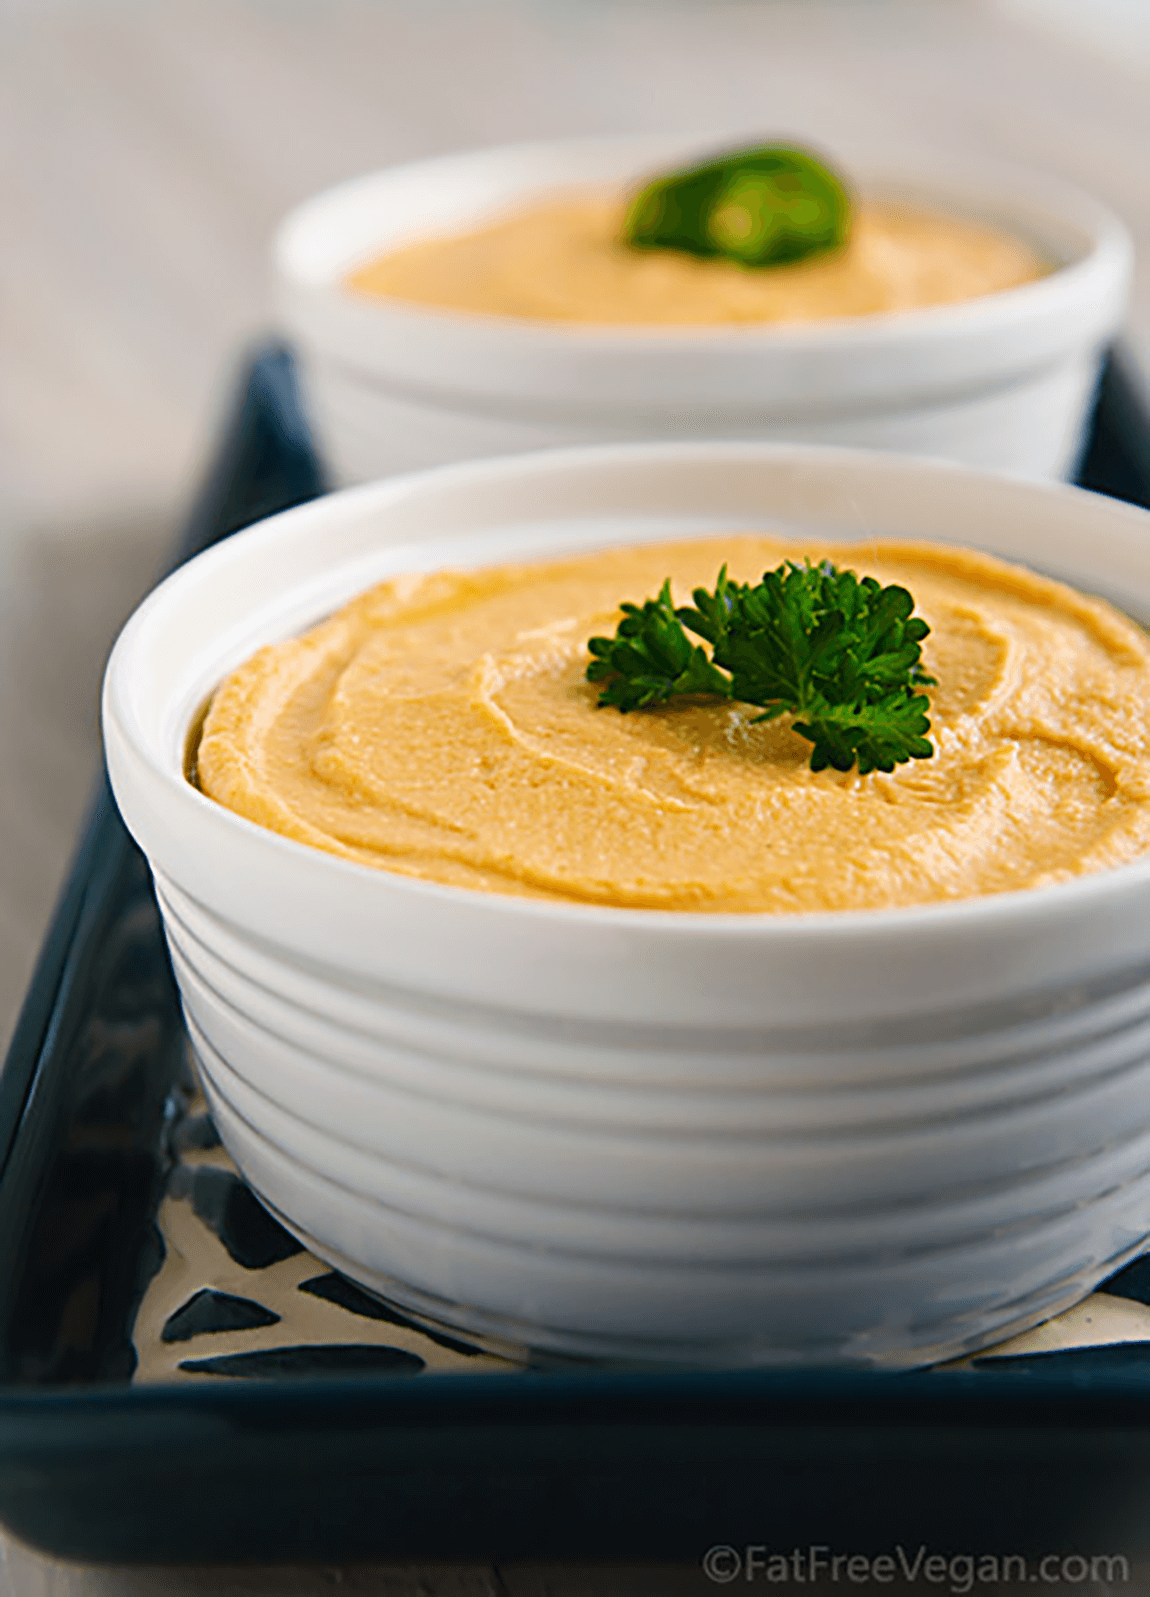 Get the Benefits of Beans with This Hummus in the Blender